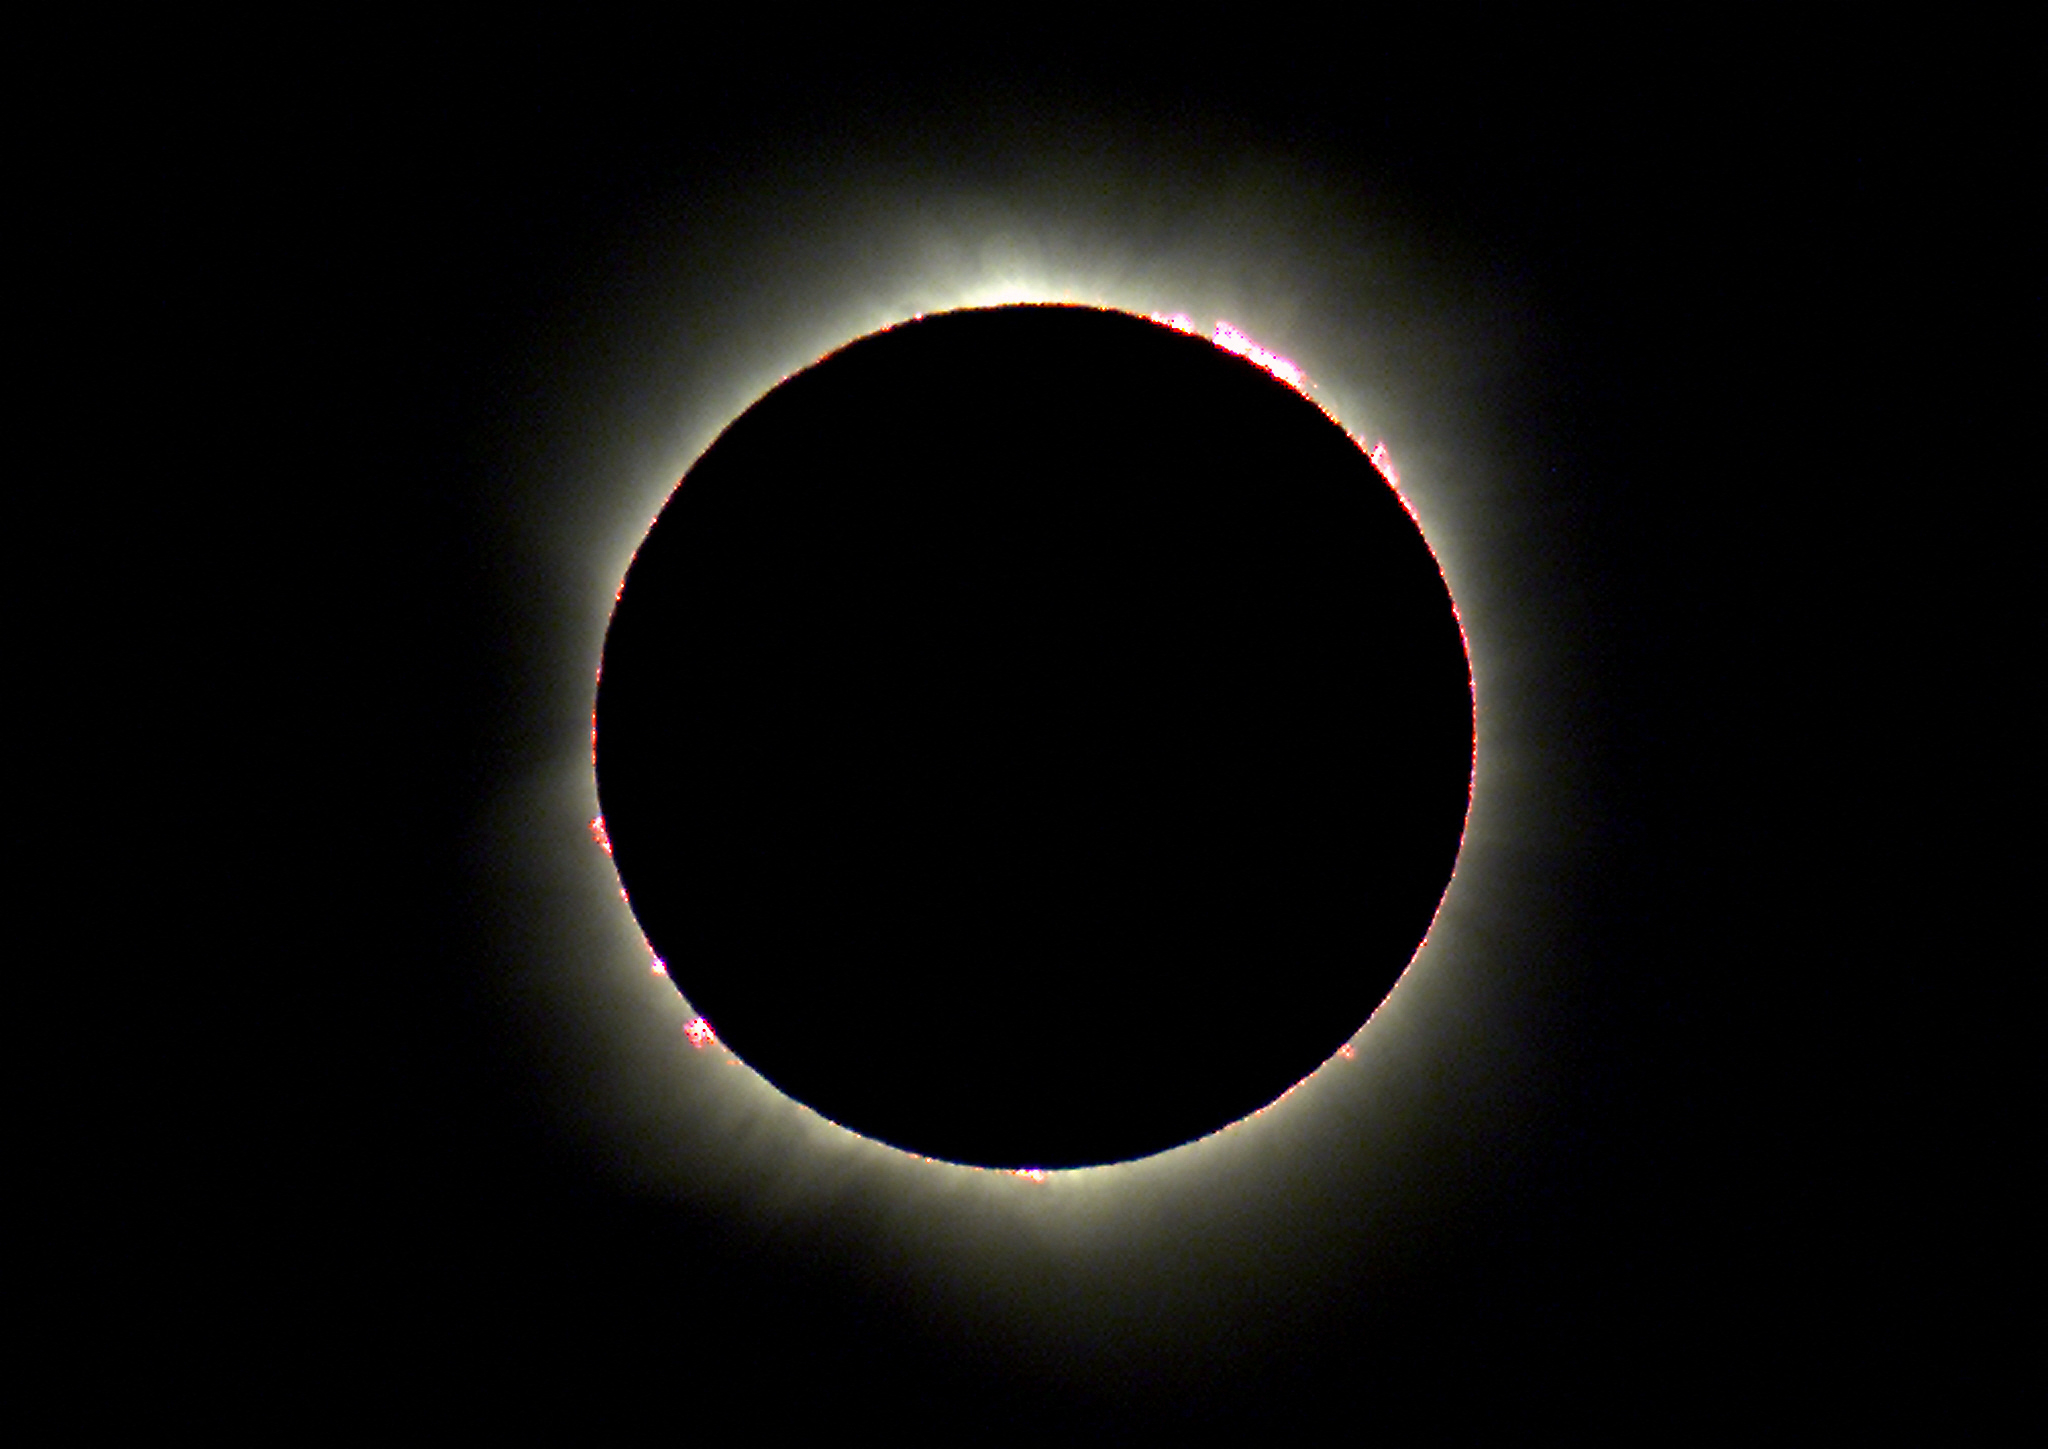 Solar eclipse showing the sun&#x27;s corona and Baily&#x27;s beads effect around the moon&#x27;s silhouette